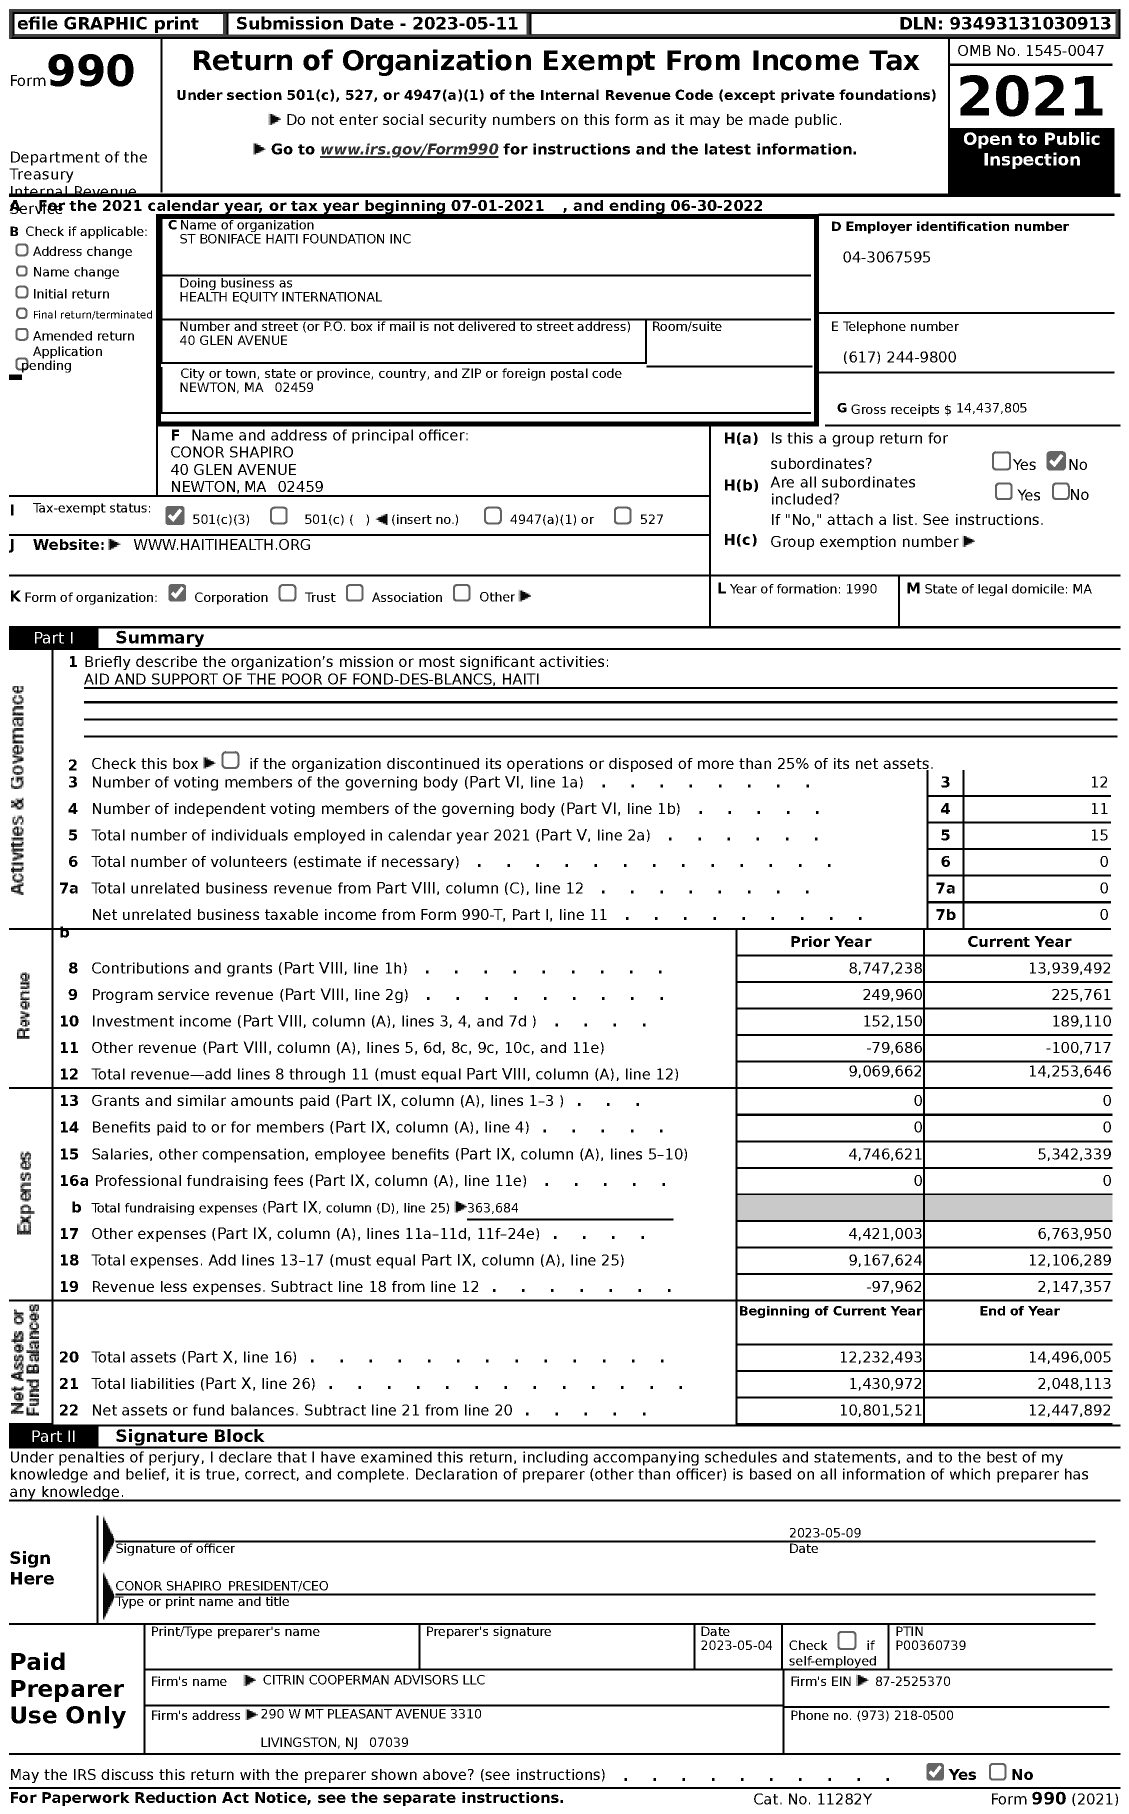 Image of first page of 2021 Form 990 for Health Equity International (SBHF)